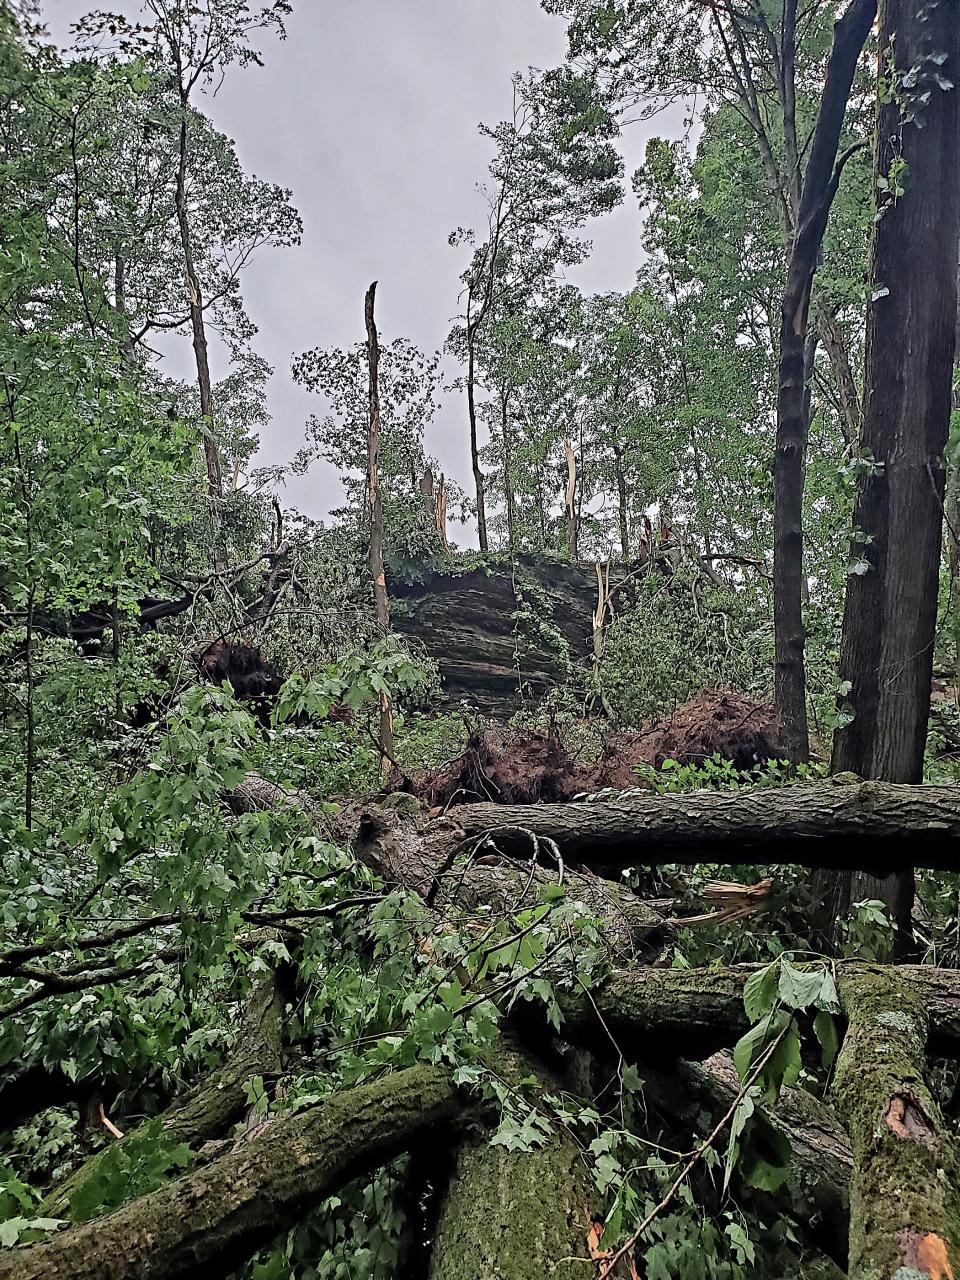 The view from atop a tree debris pile on Bromfield Road. Apparently, a wind shear had swept across a farm field above the bluff, snapping every tree in its path.